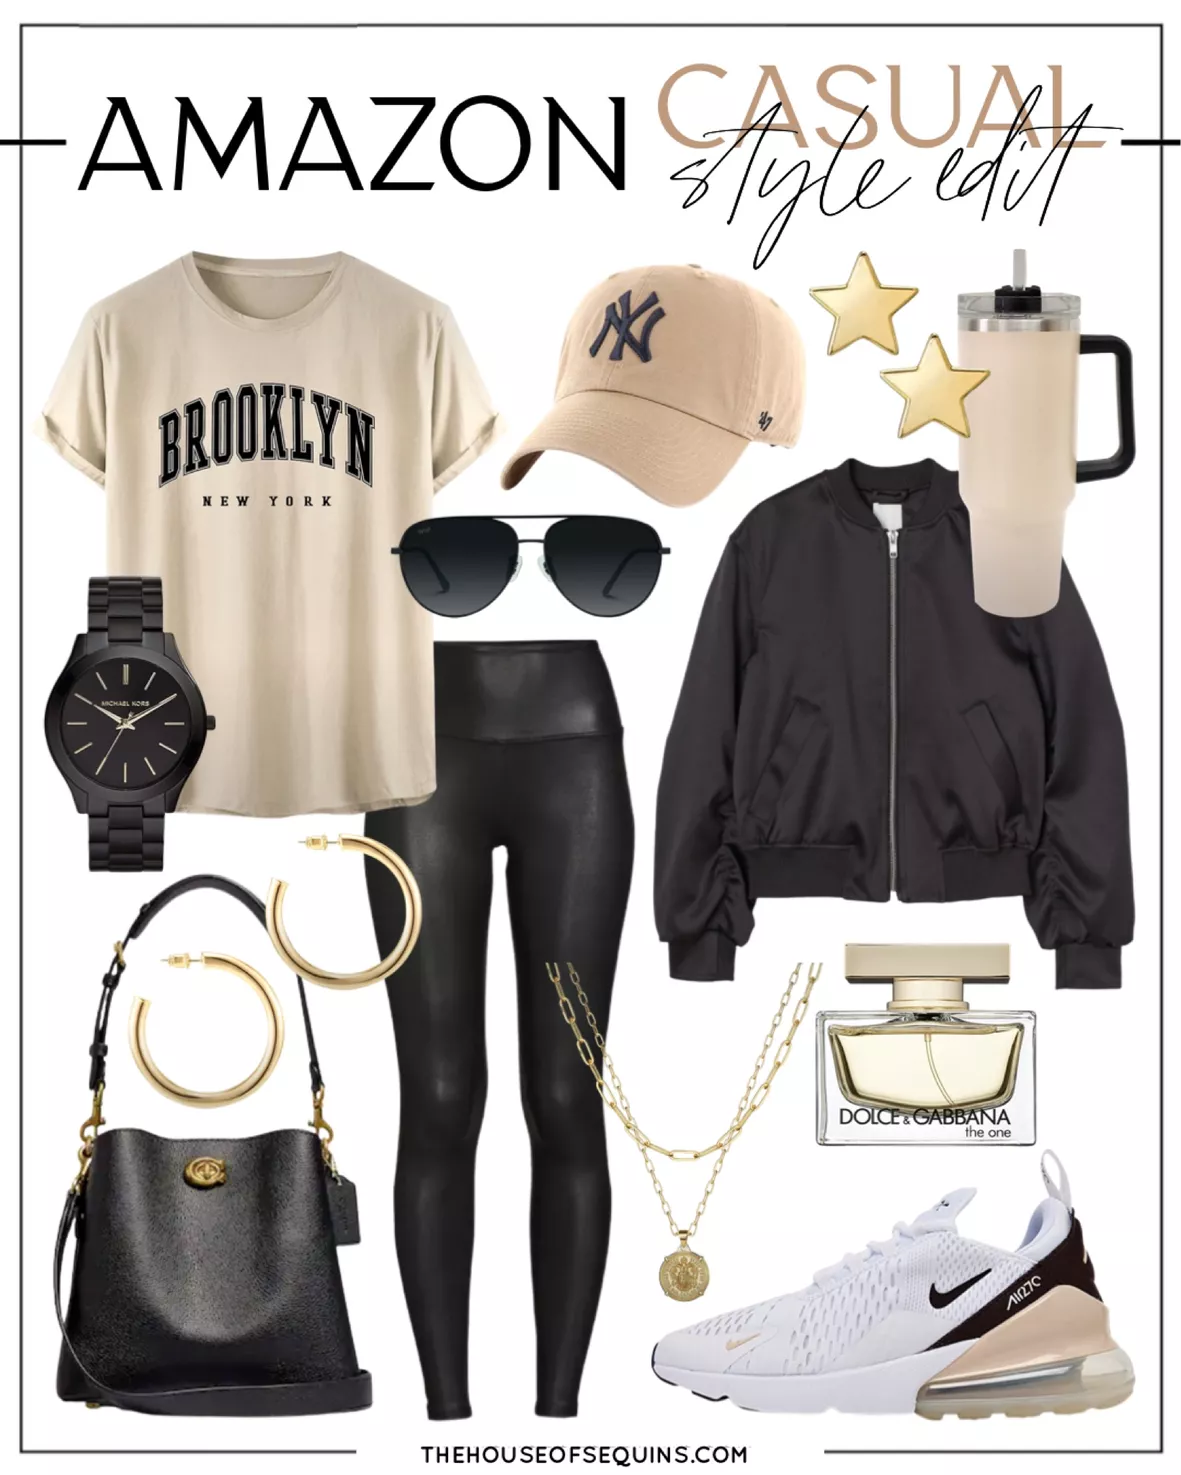 pretty black girls with swag polyvore